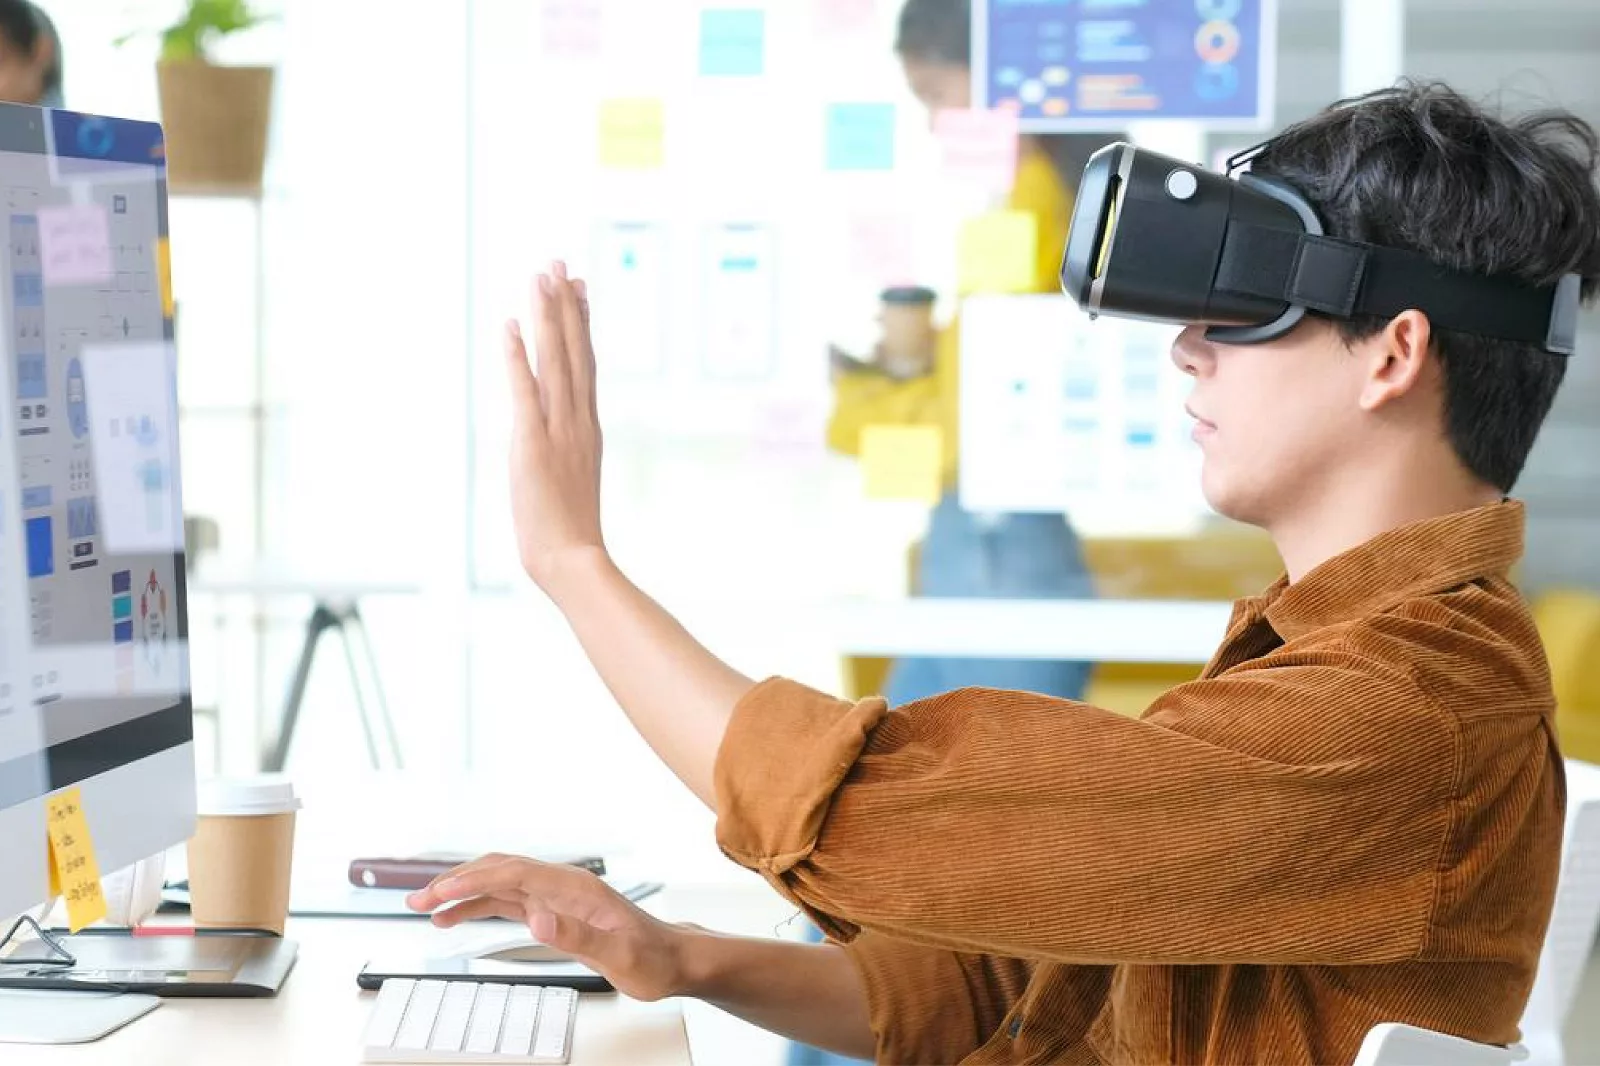 UX design impact the usability and intuitiveness of VR and AR applications